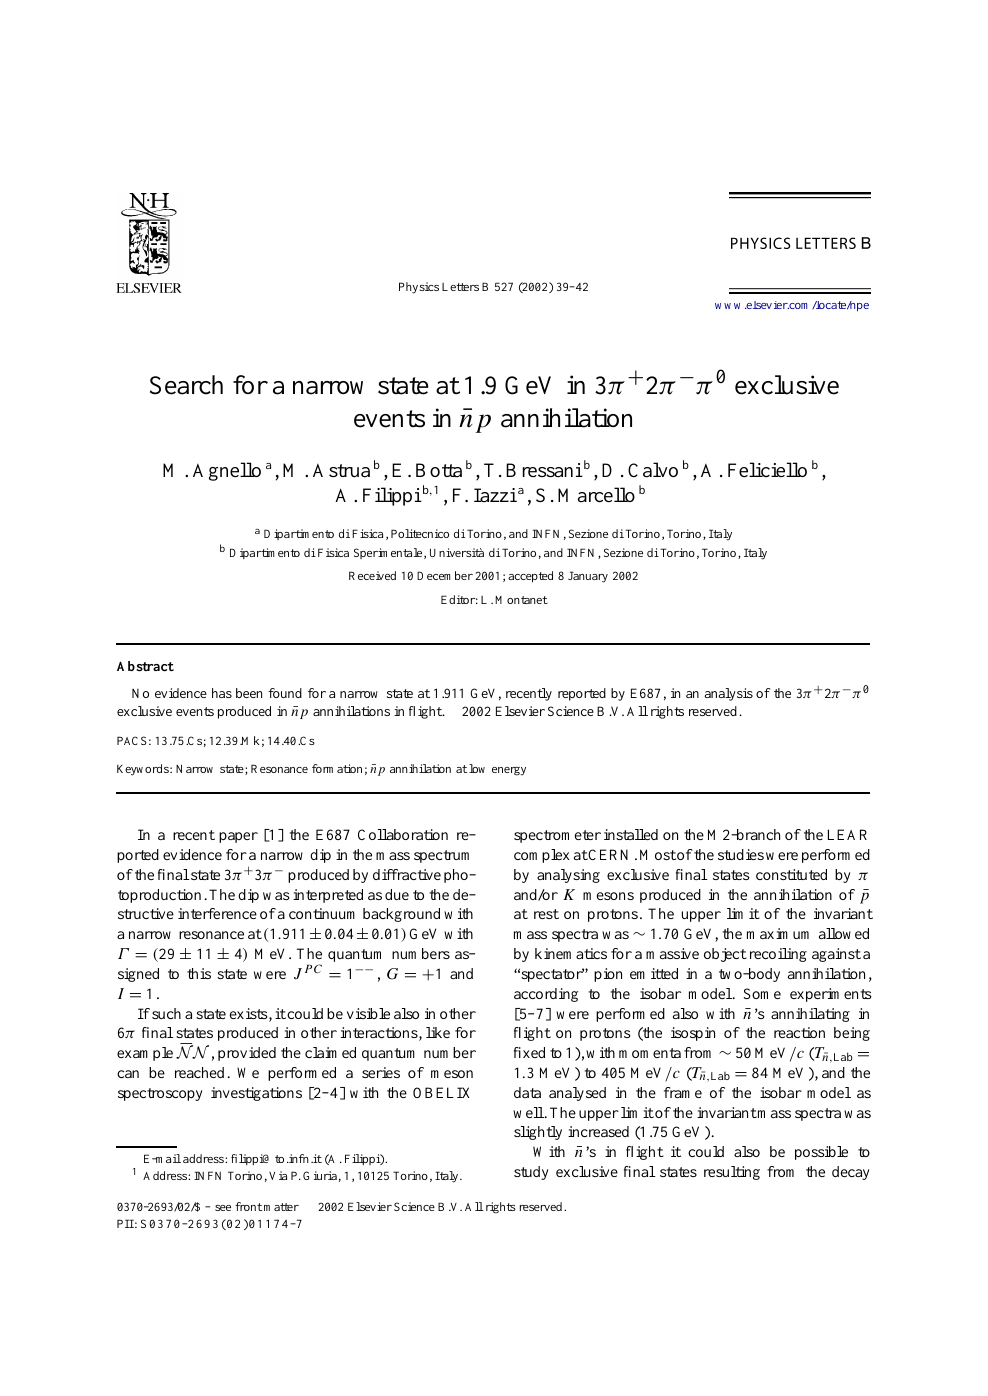 Search For A Narrow State At 1 9 Gev In 3p 2p P0 Exclusive Events In N P Annihilation Topic Of Research Paper In Physical Sciences Download Scholarly Article Pdf And Read For Free On